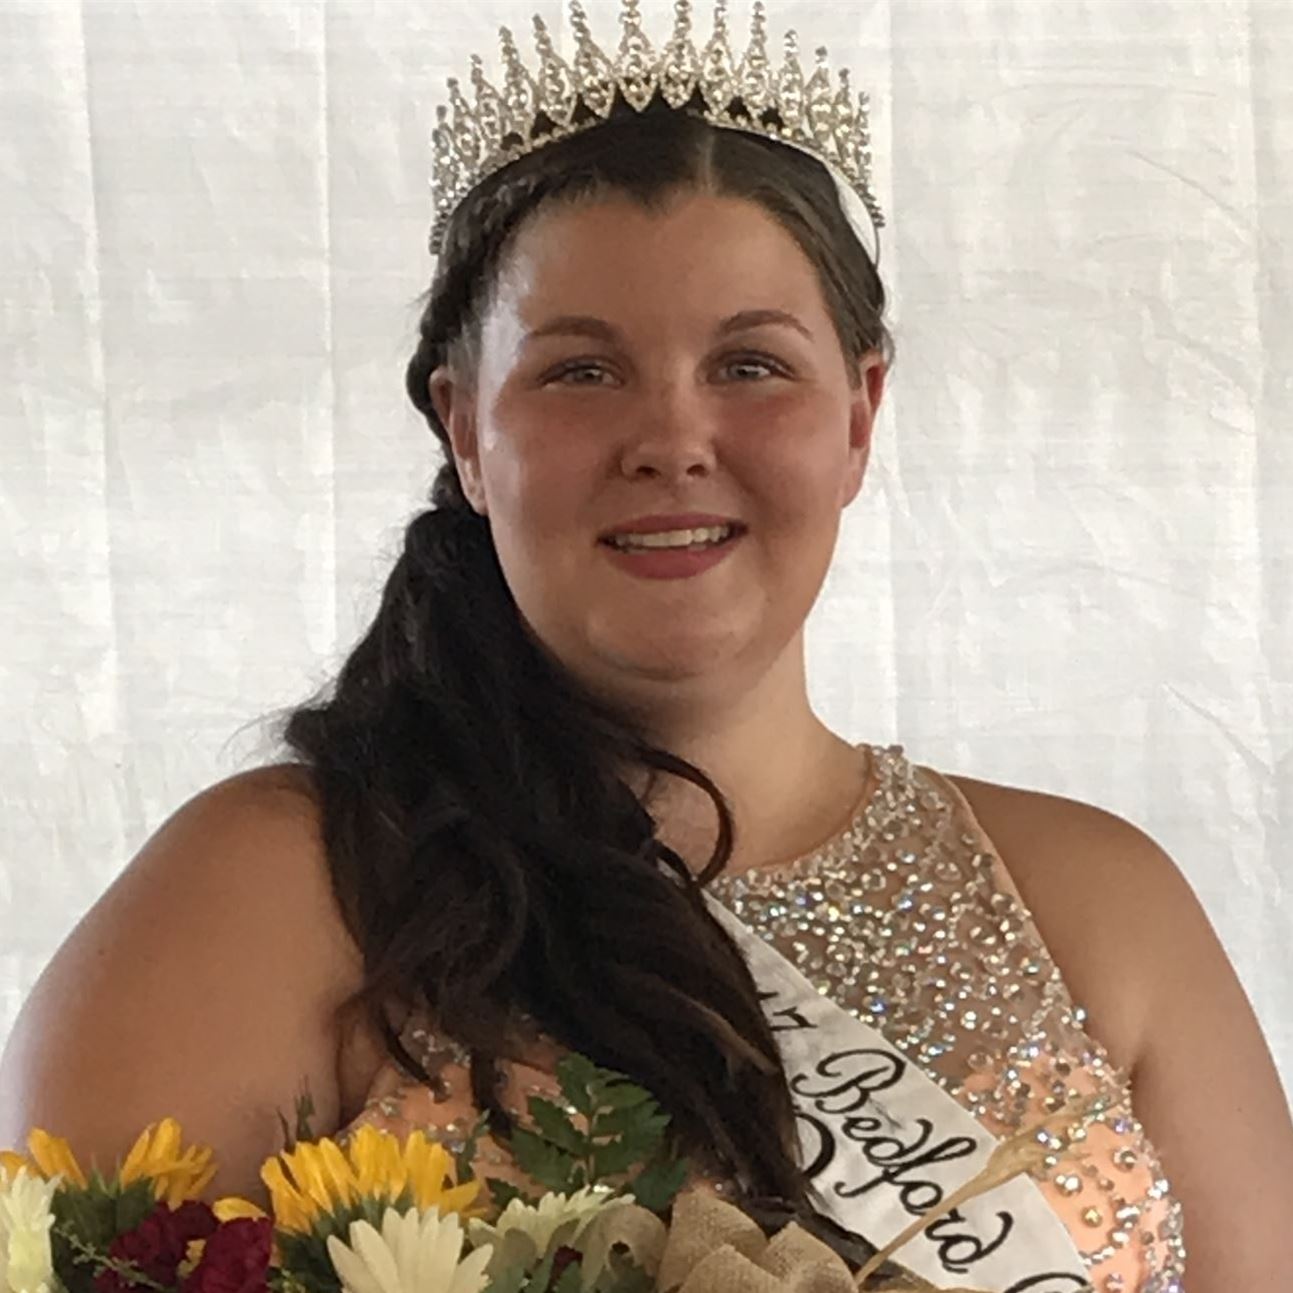 about Bedford County Fair in PA royalty